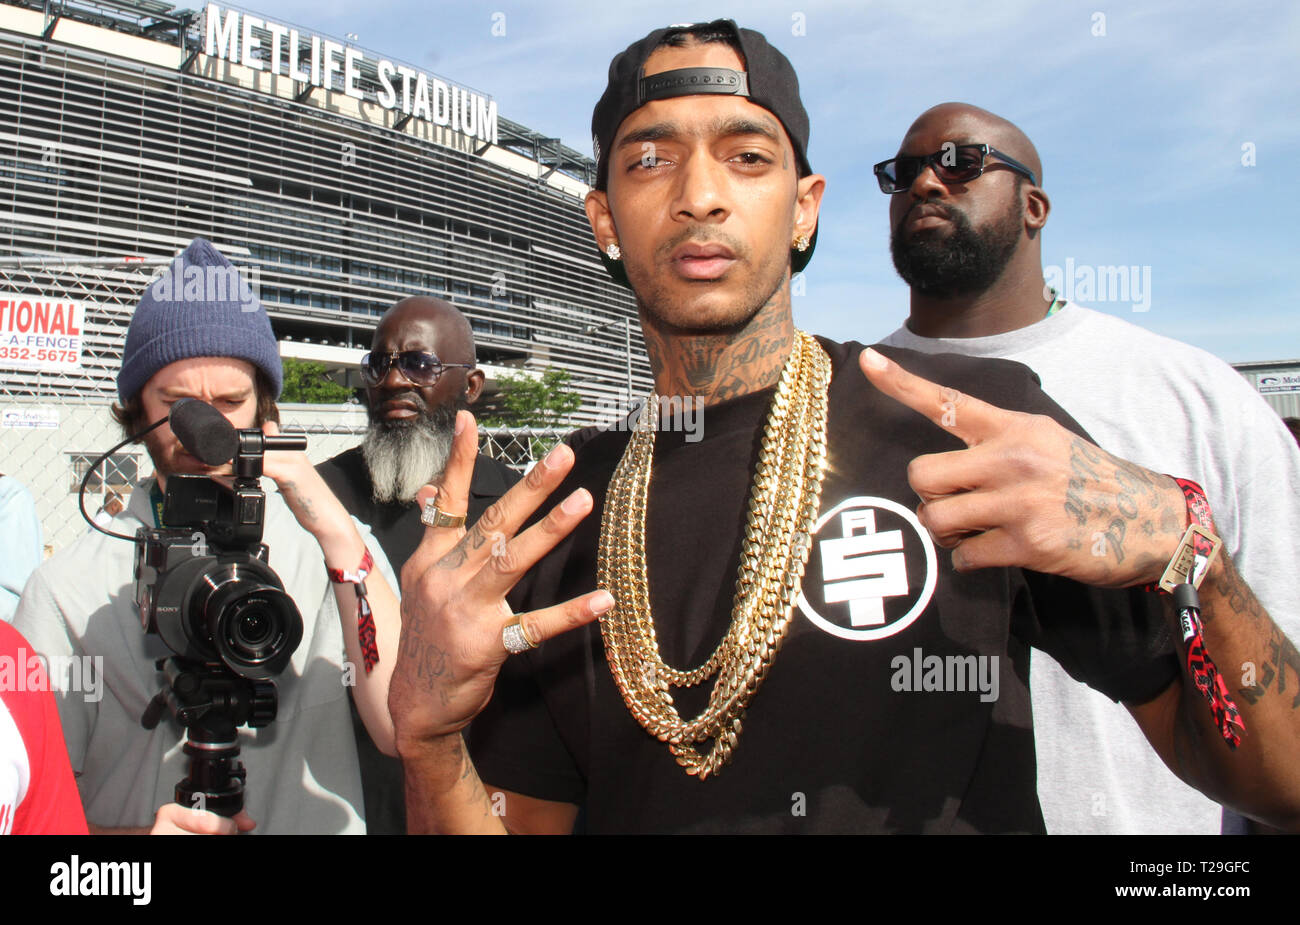 FILE PICS: Rapper Nipsey Hussle killed in shooting outside his clothing store in Los Angeles. East Rutherford, NJ - June 1, 2014 Nipsey Hussle attends the Hot 97 Summer Jam 2014 concert at Metlife Stadium, June 1, 2014 in East Rutherford, NJ Walik Goshorn/MediaPunch Credit: MediaPunch Inc/Alamy Live News Stock Photo